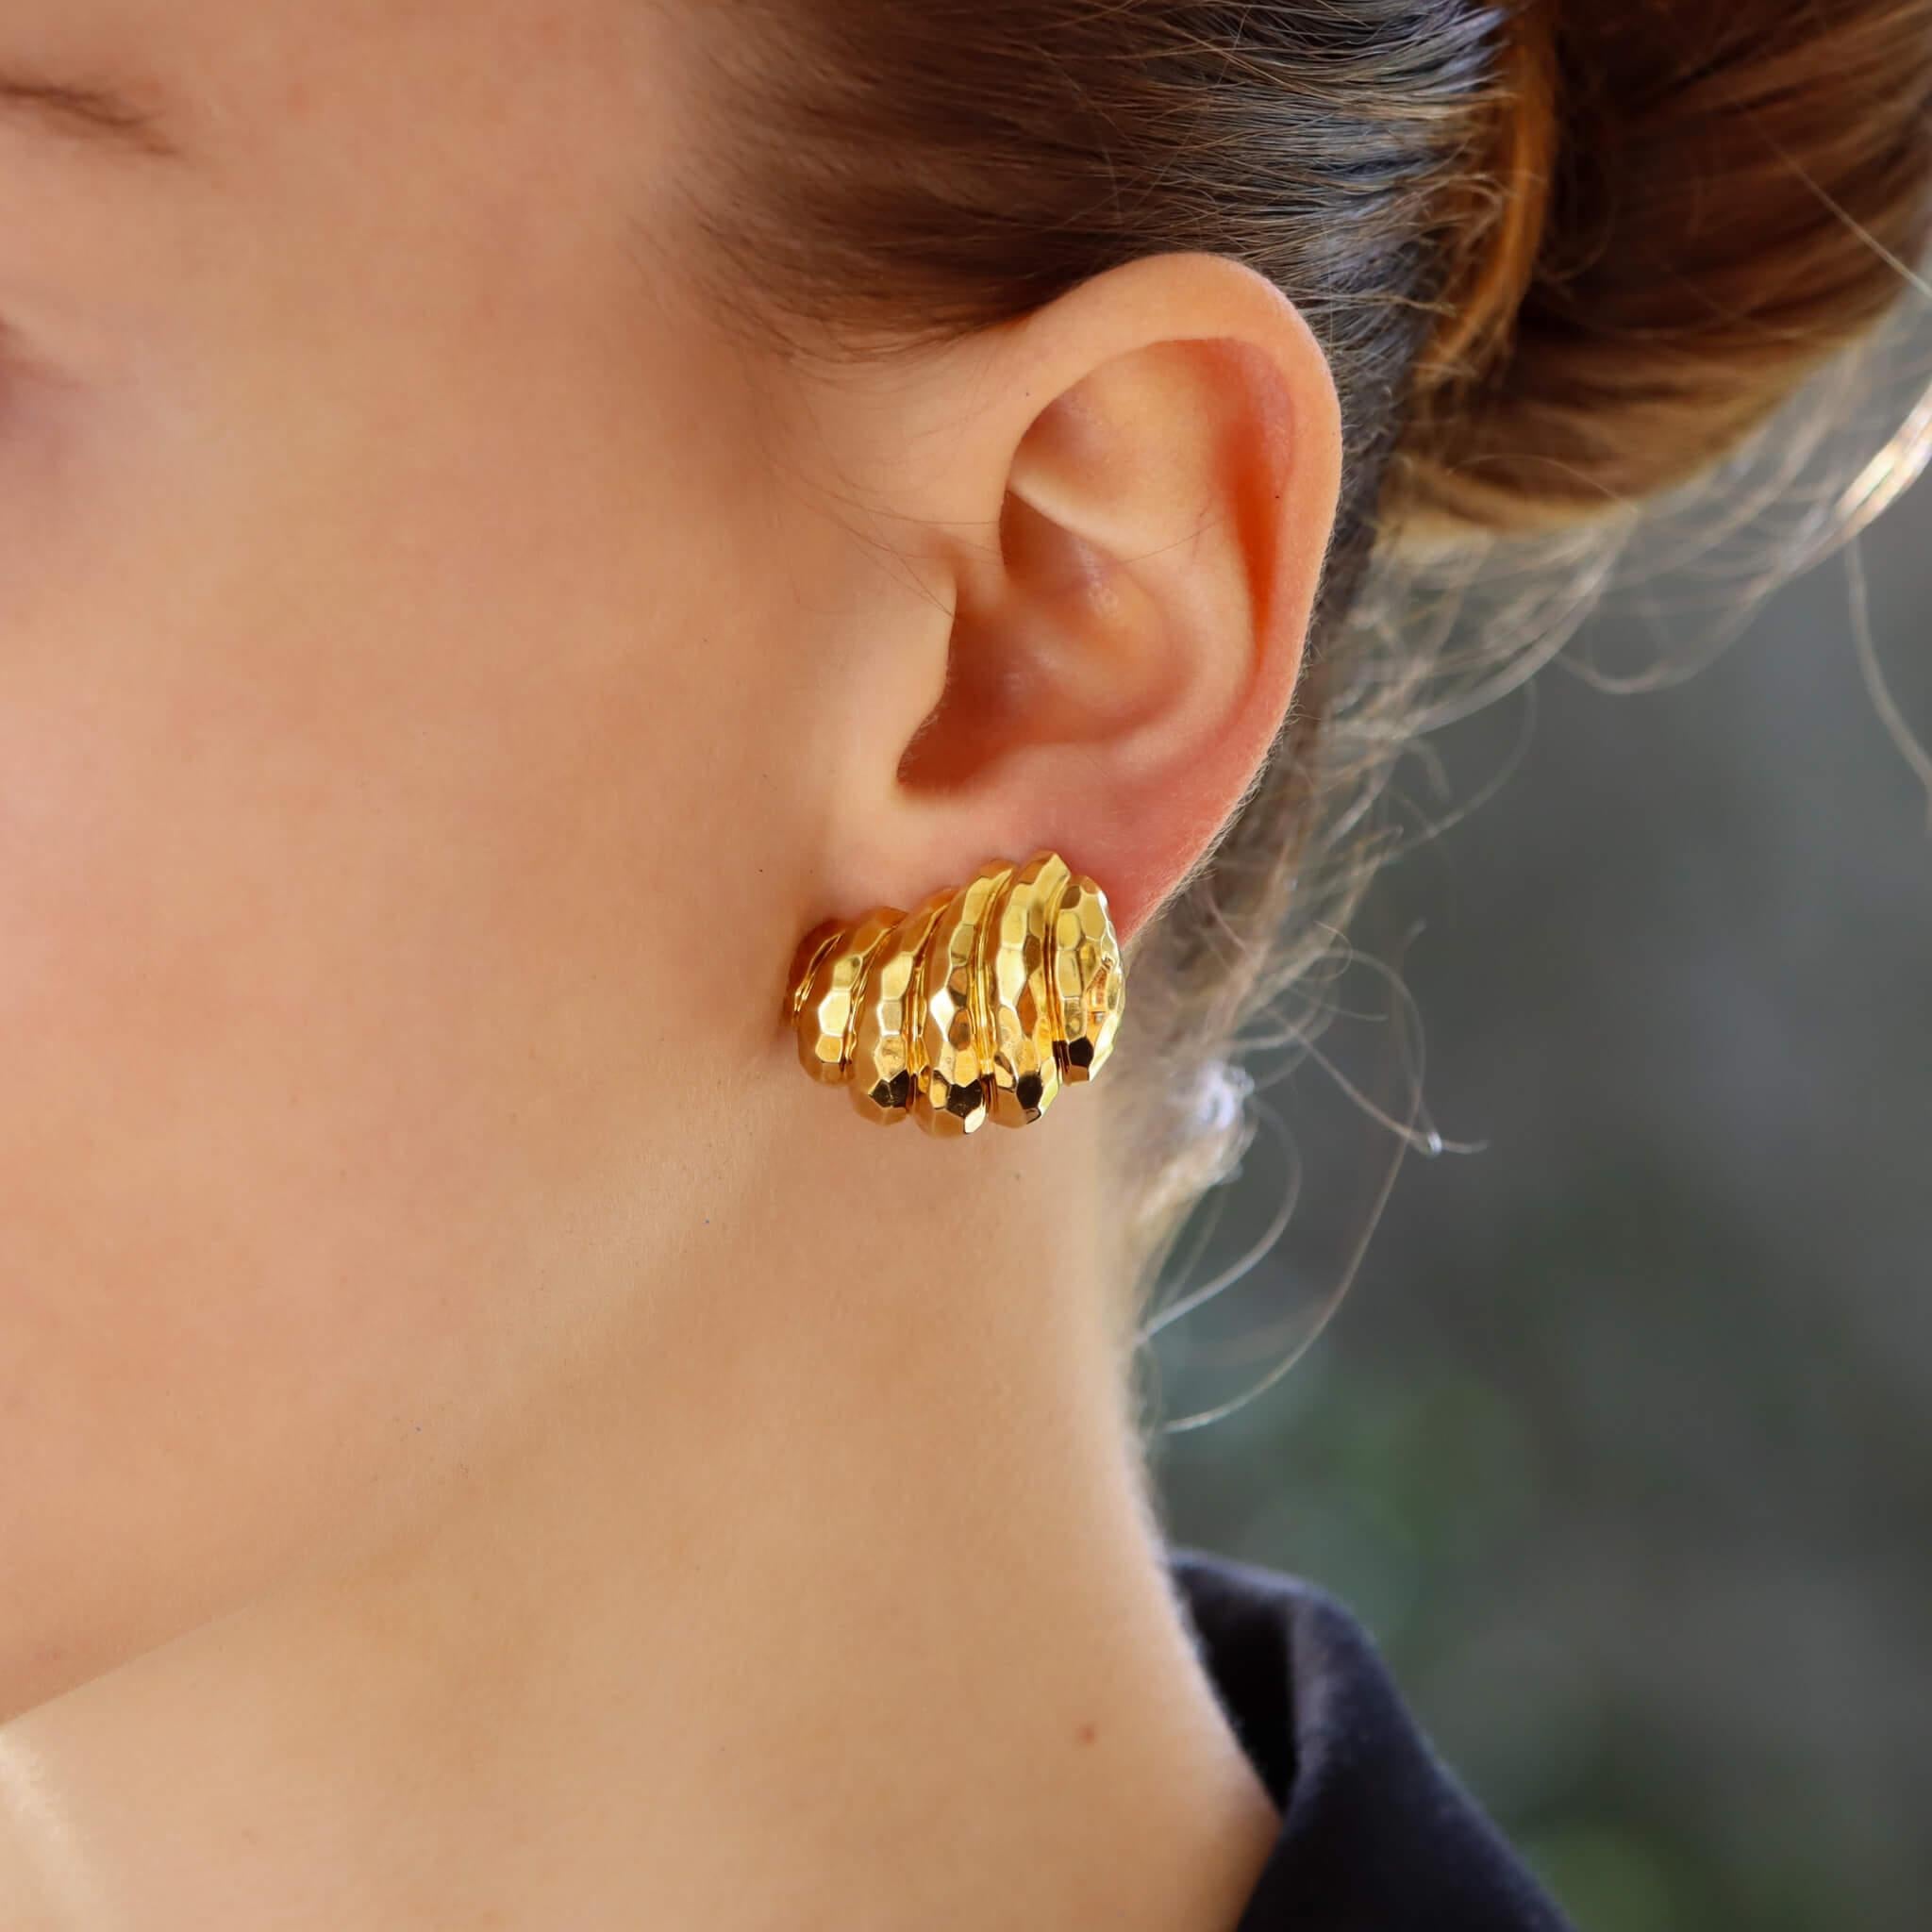 A unique vintage pair of Henry Dunay retro inspired hammered gold earrings set in 18k yellow gold.

Each earring is composed of a twirled shell-like motif which is completely decorated with a hammered gold effect. They are secured to reverse with a